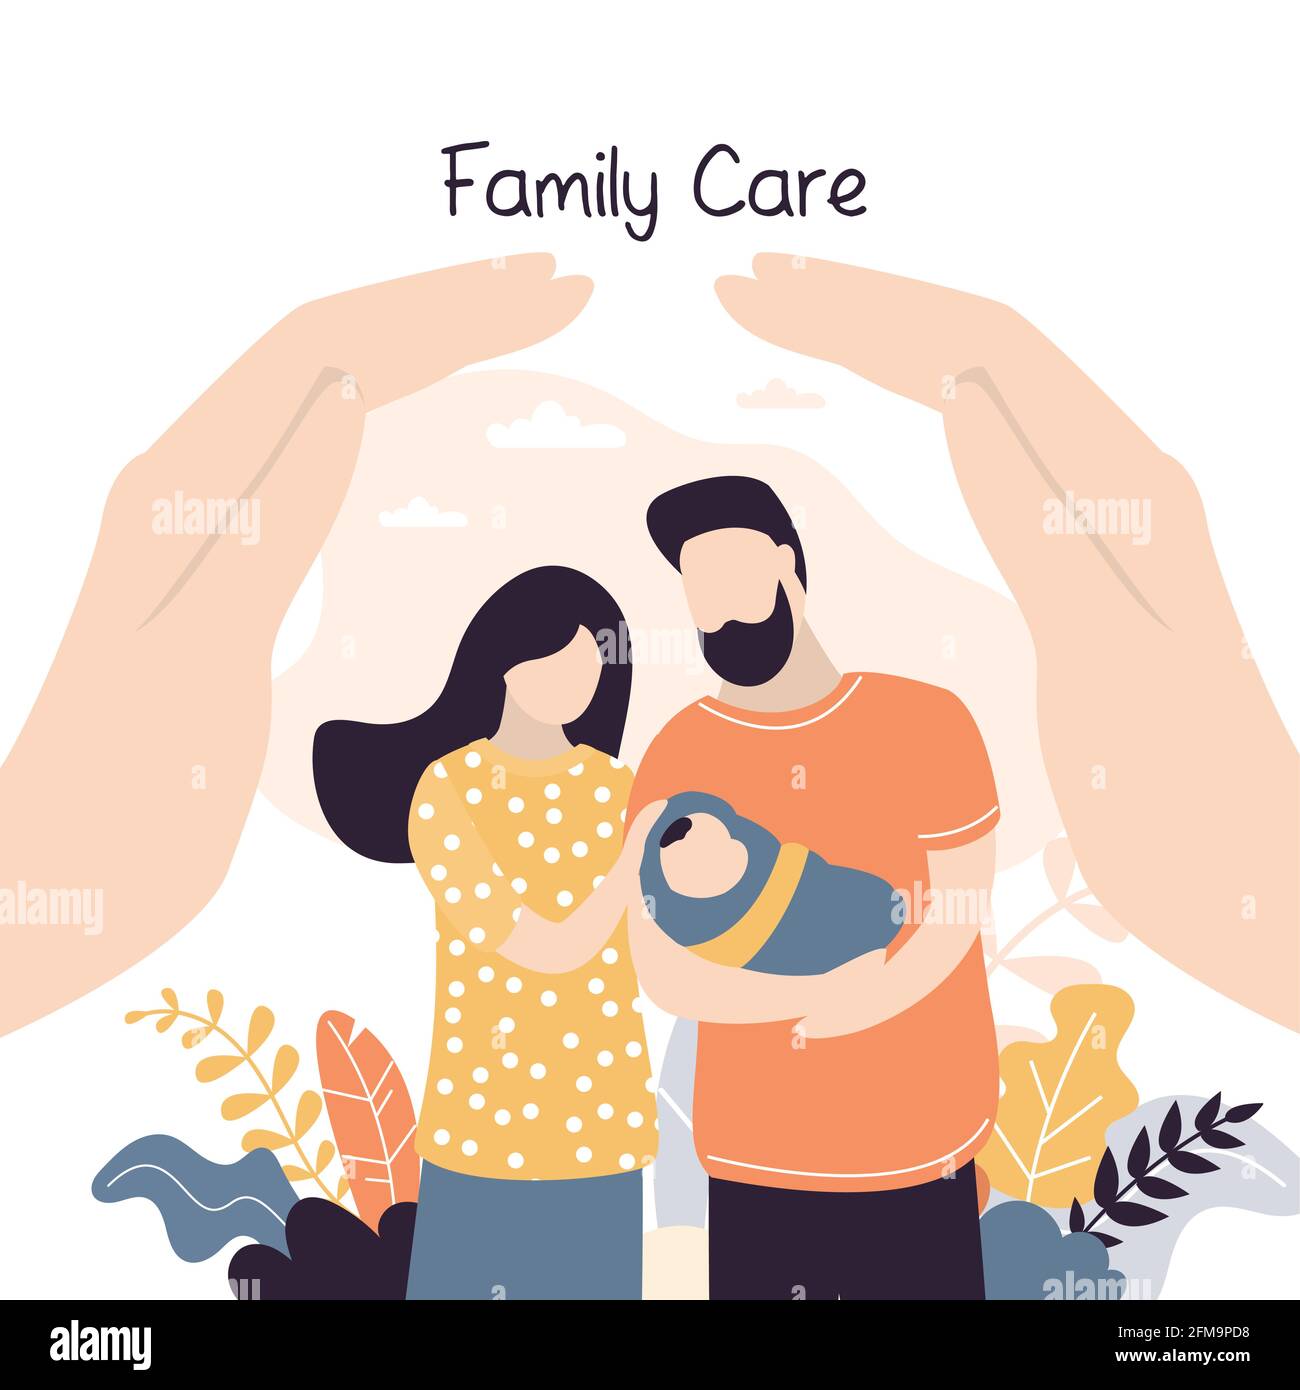 Insurance and healthcare concept background. Big hands covering tiny young love couple with newborn baby. Medical or financial assurance,family care b Stock Vector